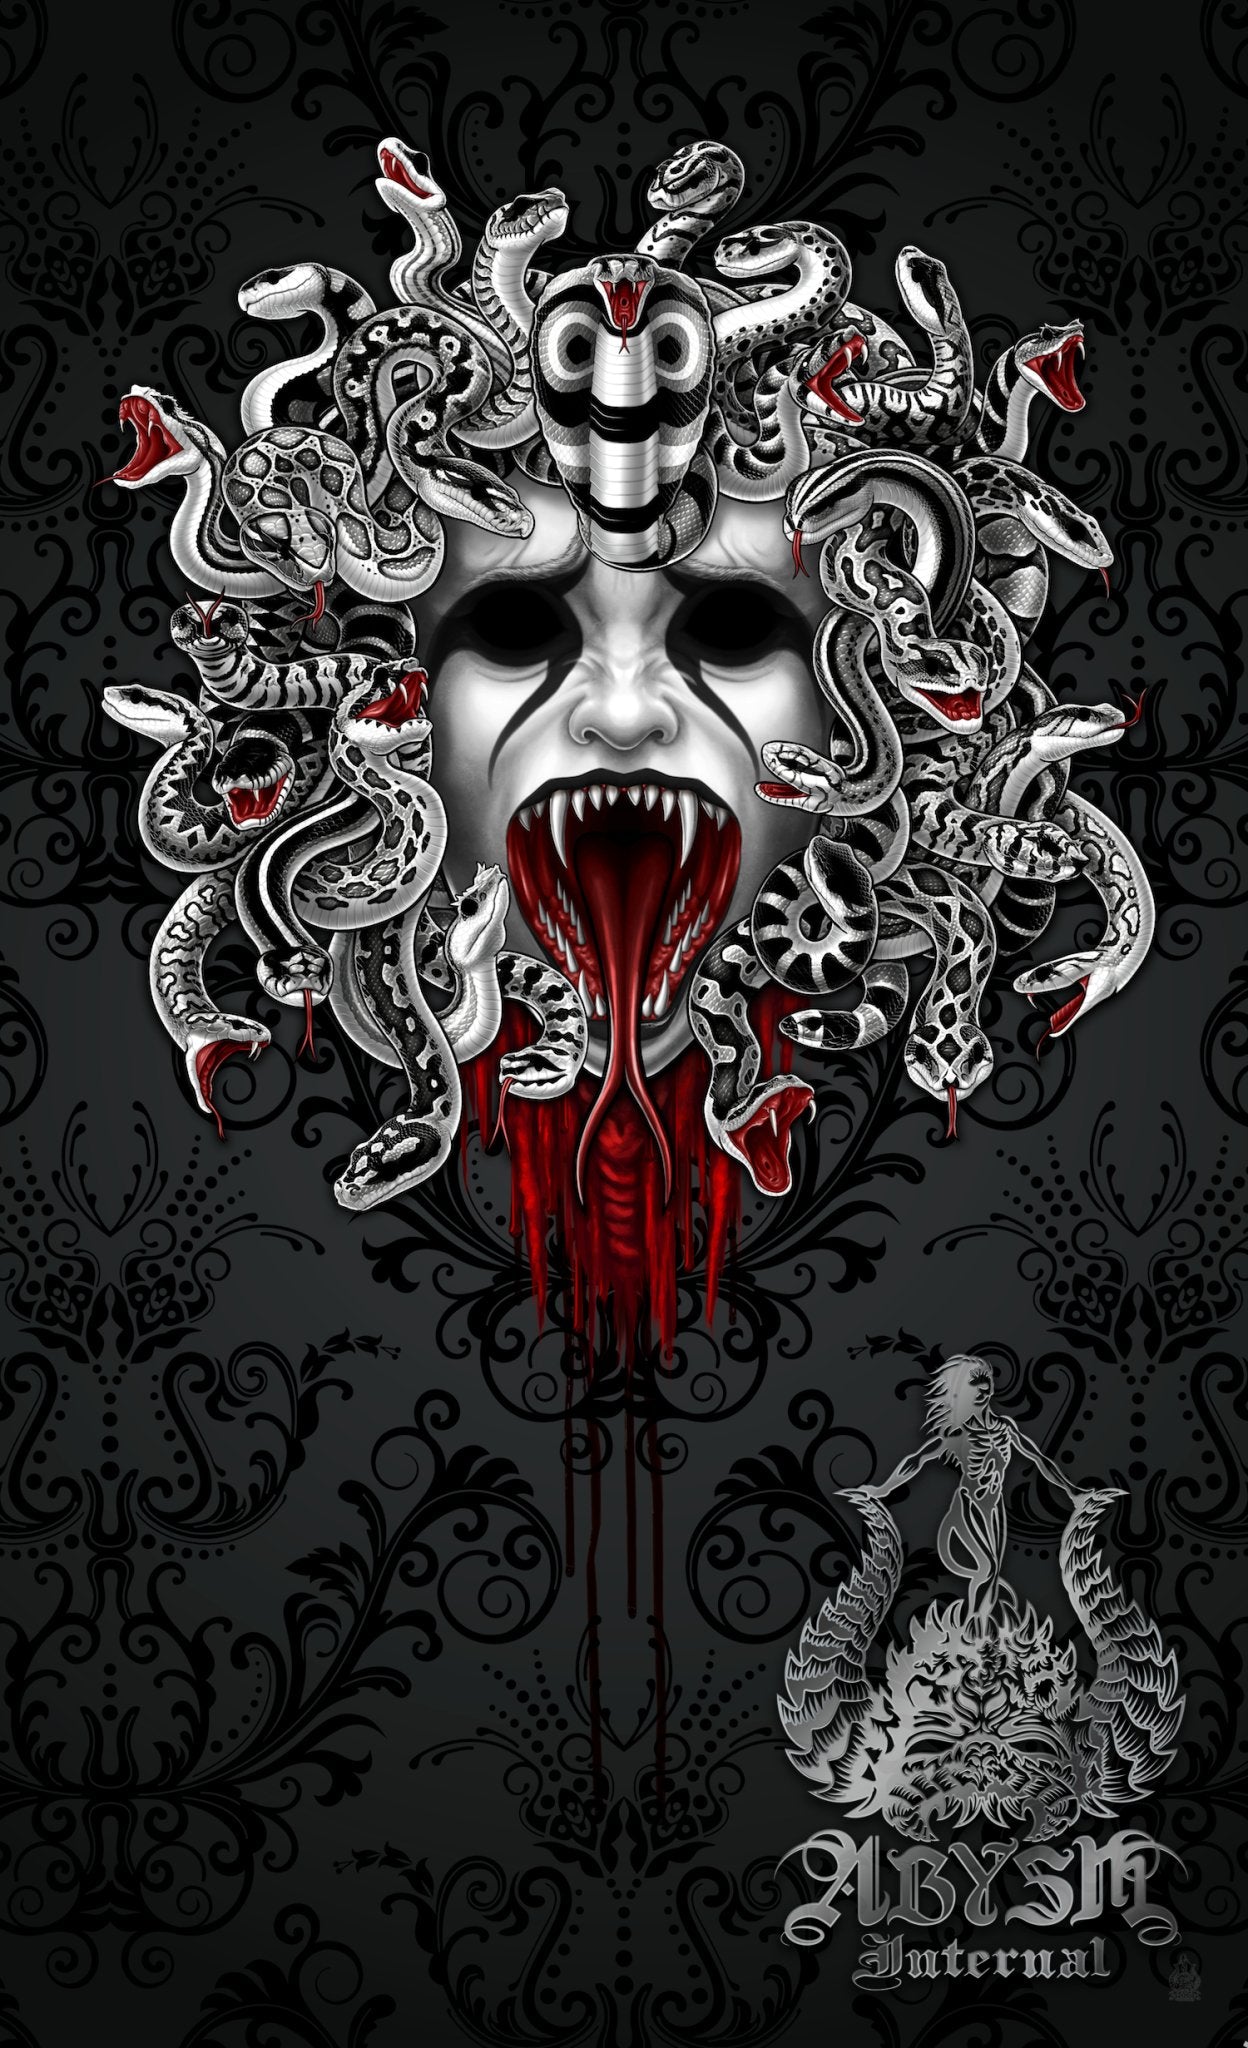 Goth Curtains, 50x84' Printed Window Panels, Nu Gothic Home Decor, Art Print - Black, Screaming Medusa & Red, 2 Faces, 3 Colors - Abysm Internal